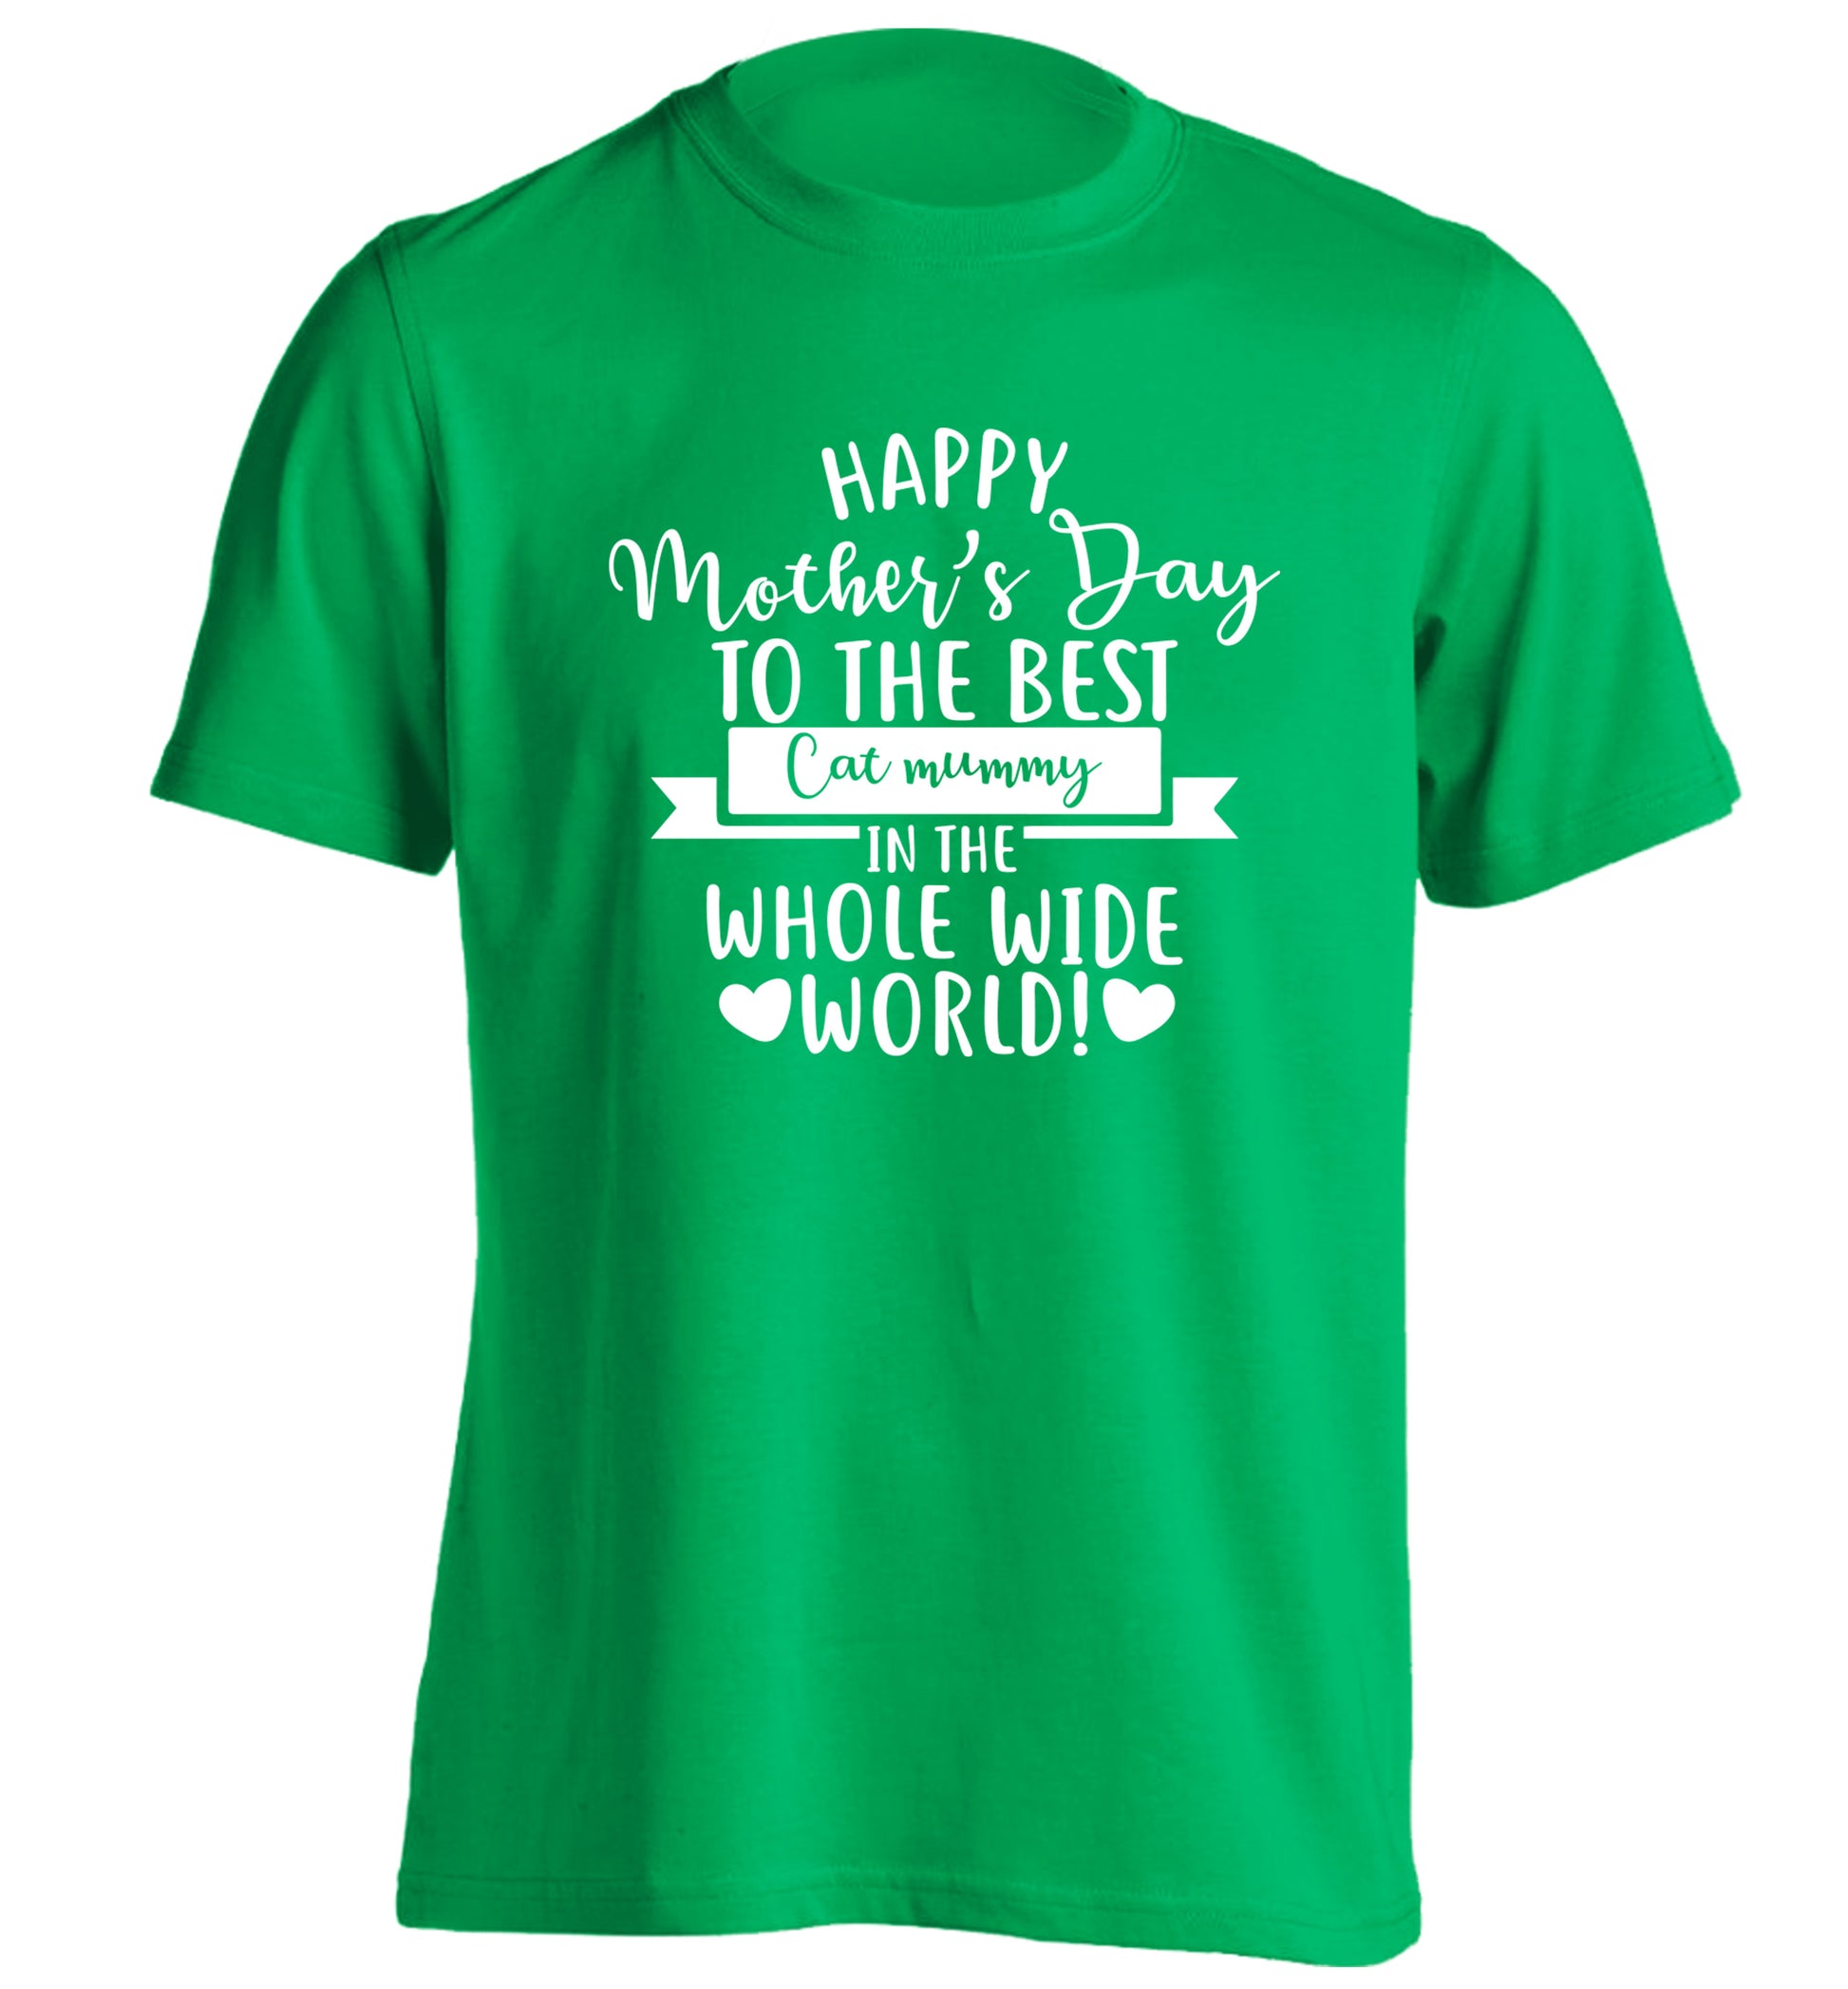 Happy mother's day to the best cat mummy in the world adults unisex green Tshirt 2XL